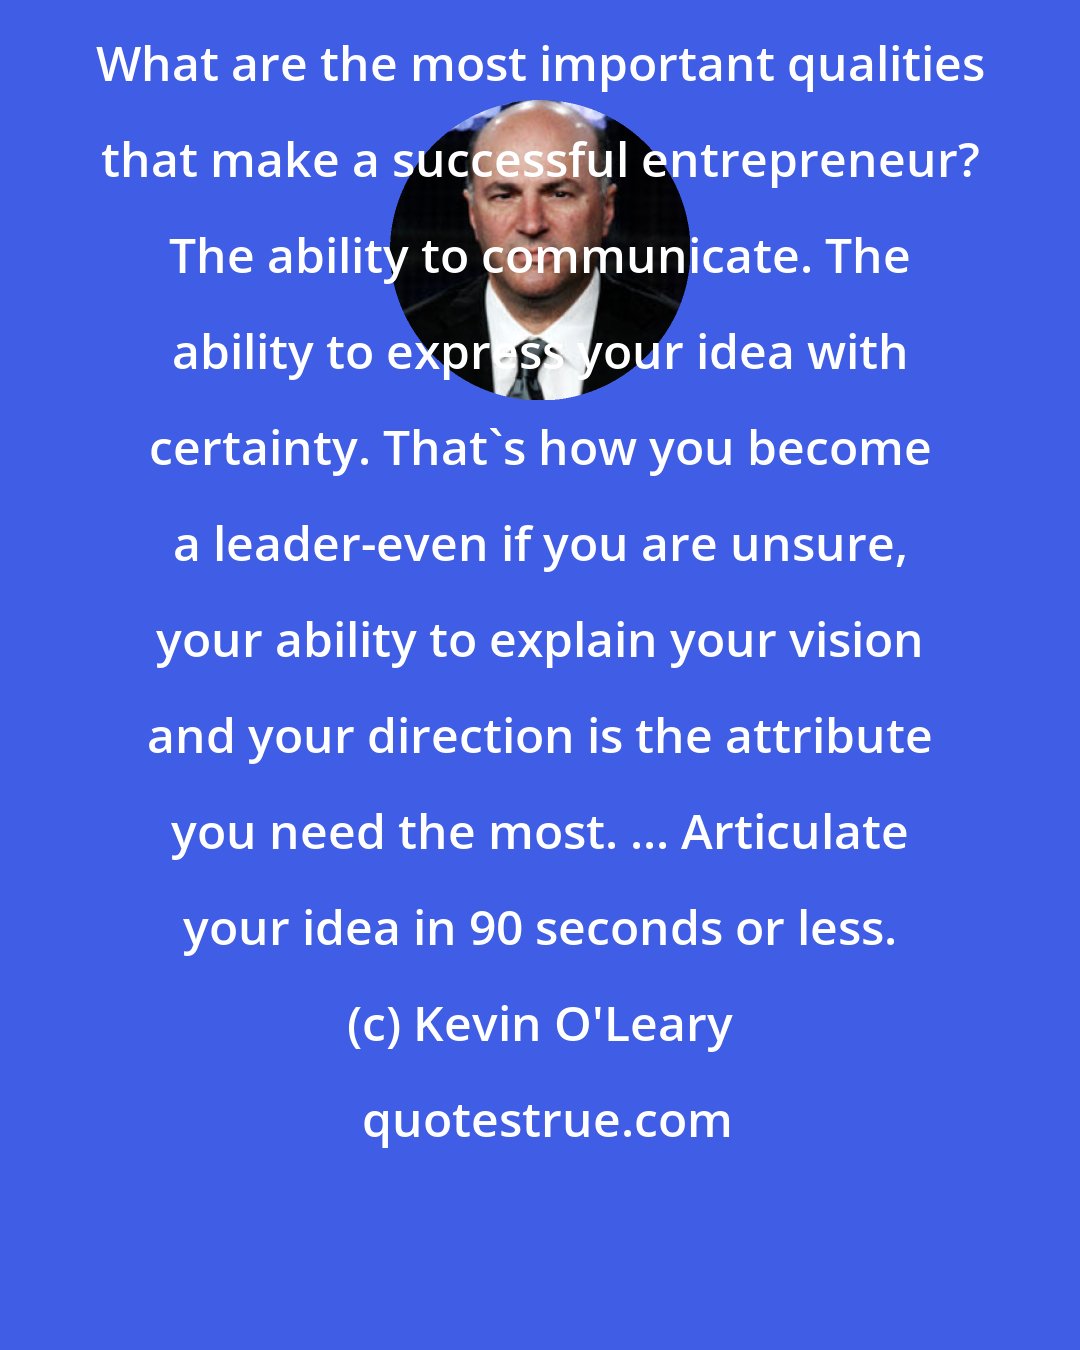 Kevin O'Leary: What are the most important qualities that make a successful entrepreneur? The ability to communicate. The ability to express your idea with certainty. That's how you become a leader-even if you are unsure, your ability to explain your vision and your direction is the attribute you need the most. ... Articulate your idea in 90 seconds or less.